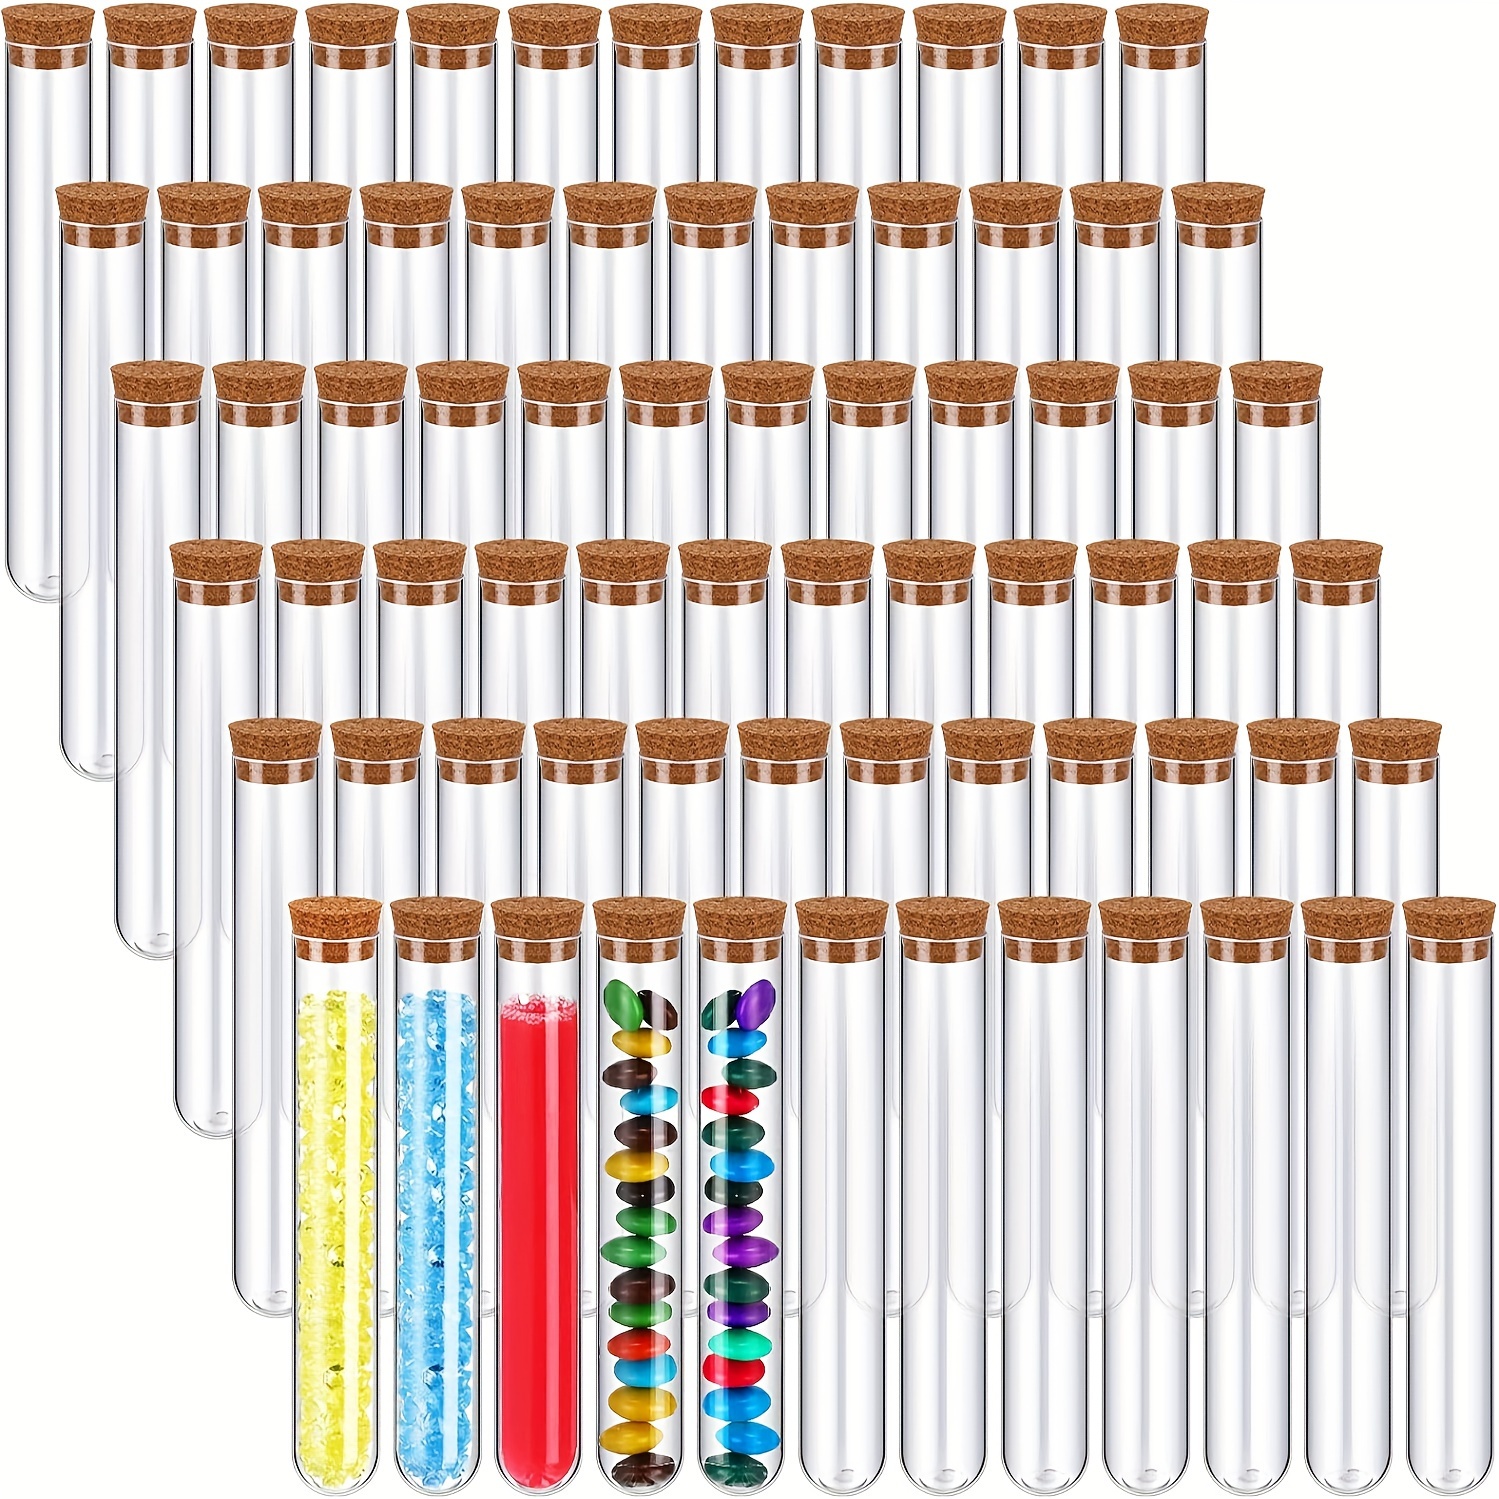 

20pcs Clear Plastic Test Tubes With Cork Stoppers, 10ml - Multipurpose Storage For Jewelry, Seeds, Powder, Liquid - Ideal For Lab Use Or Decor - Unscented Refillable Containers